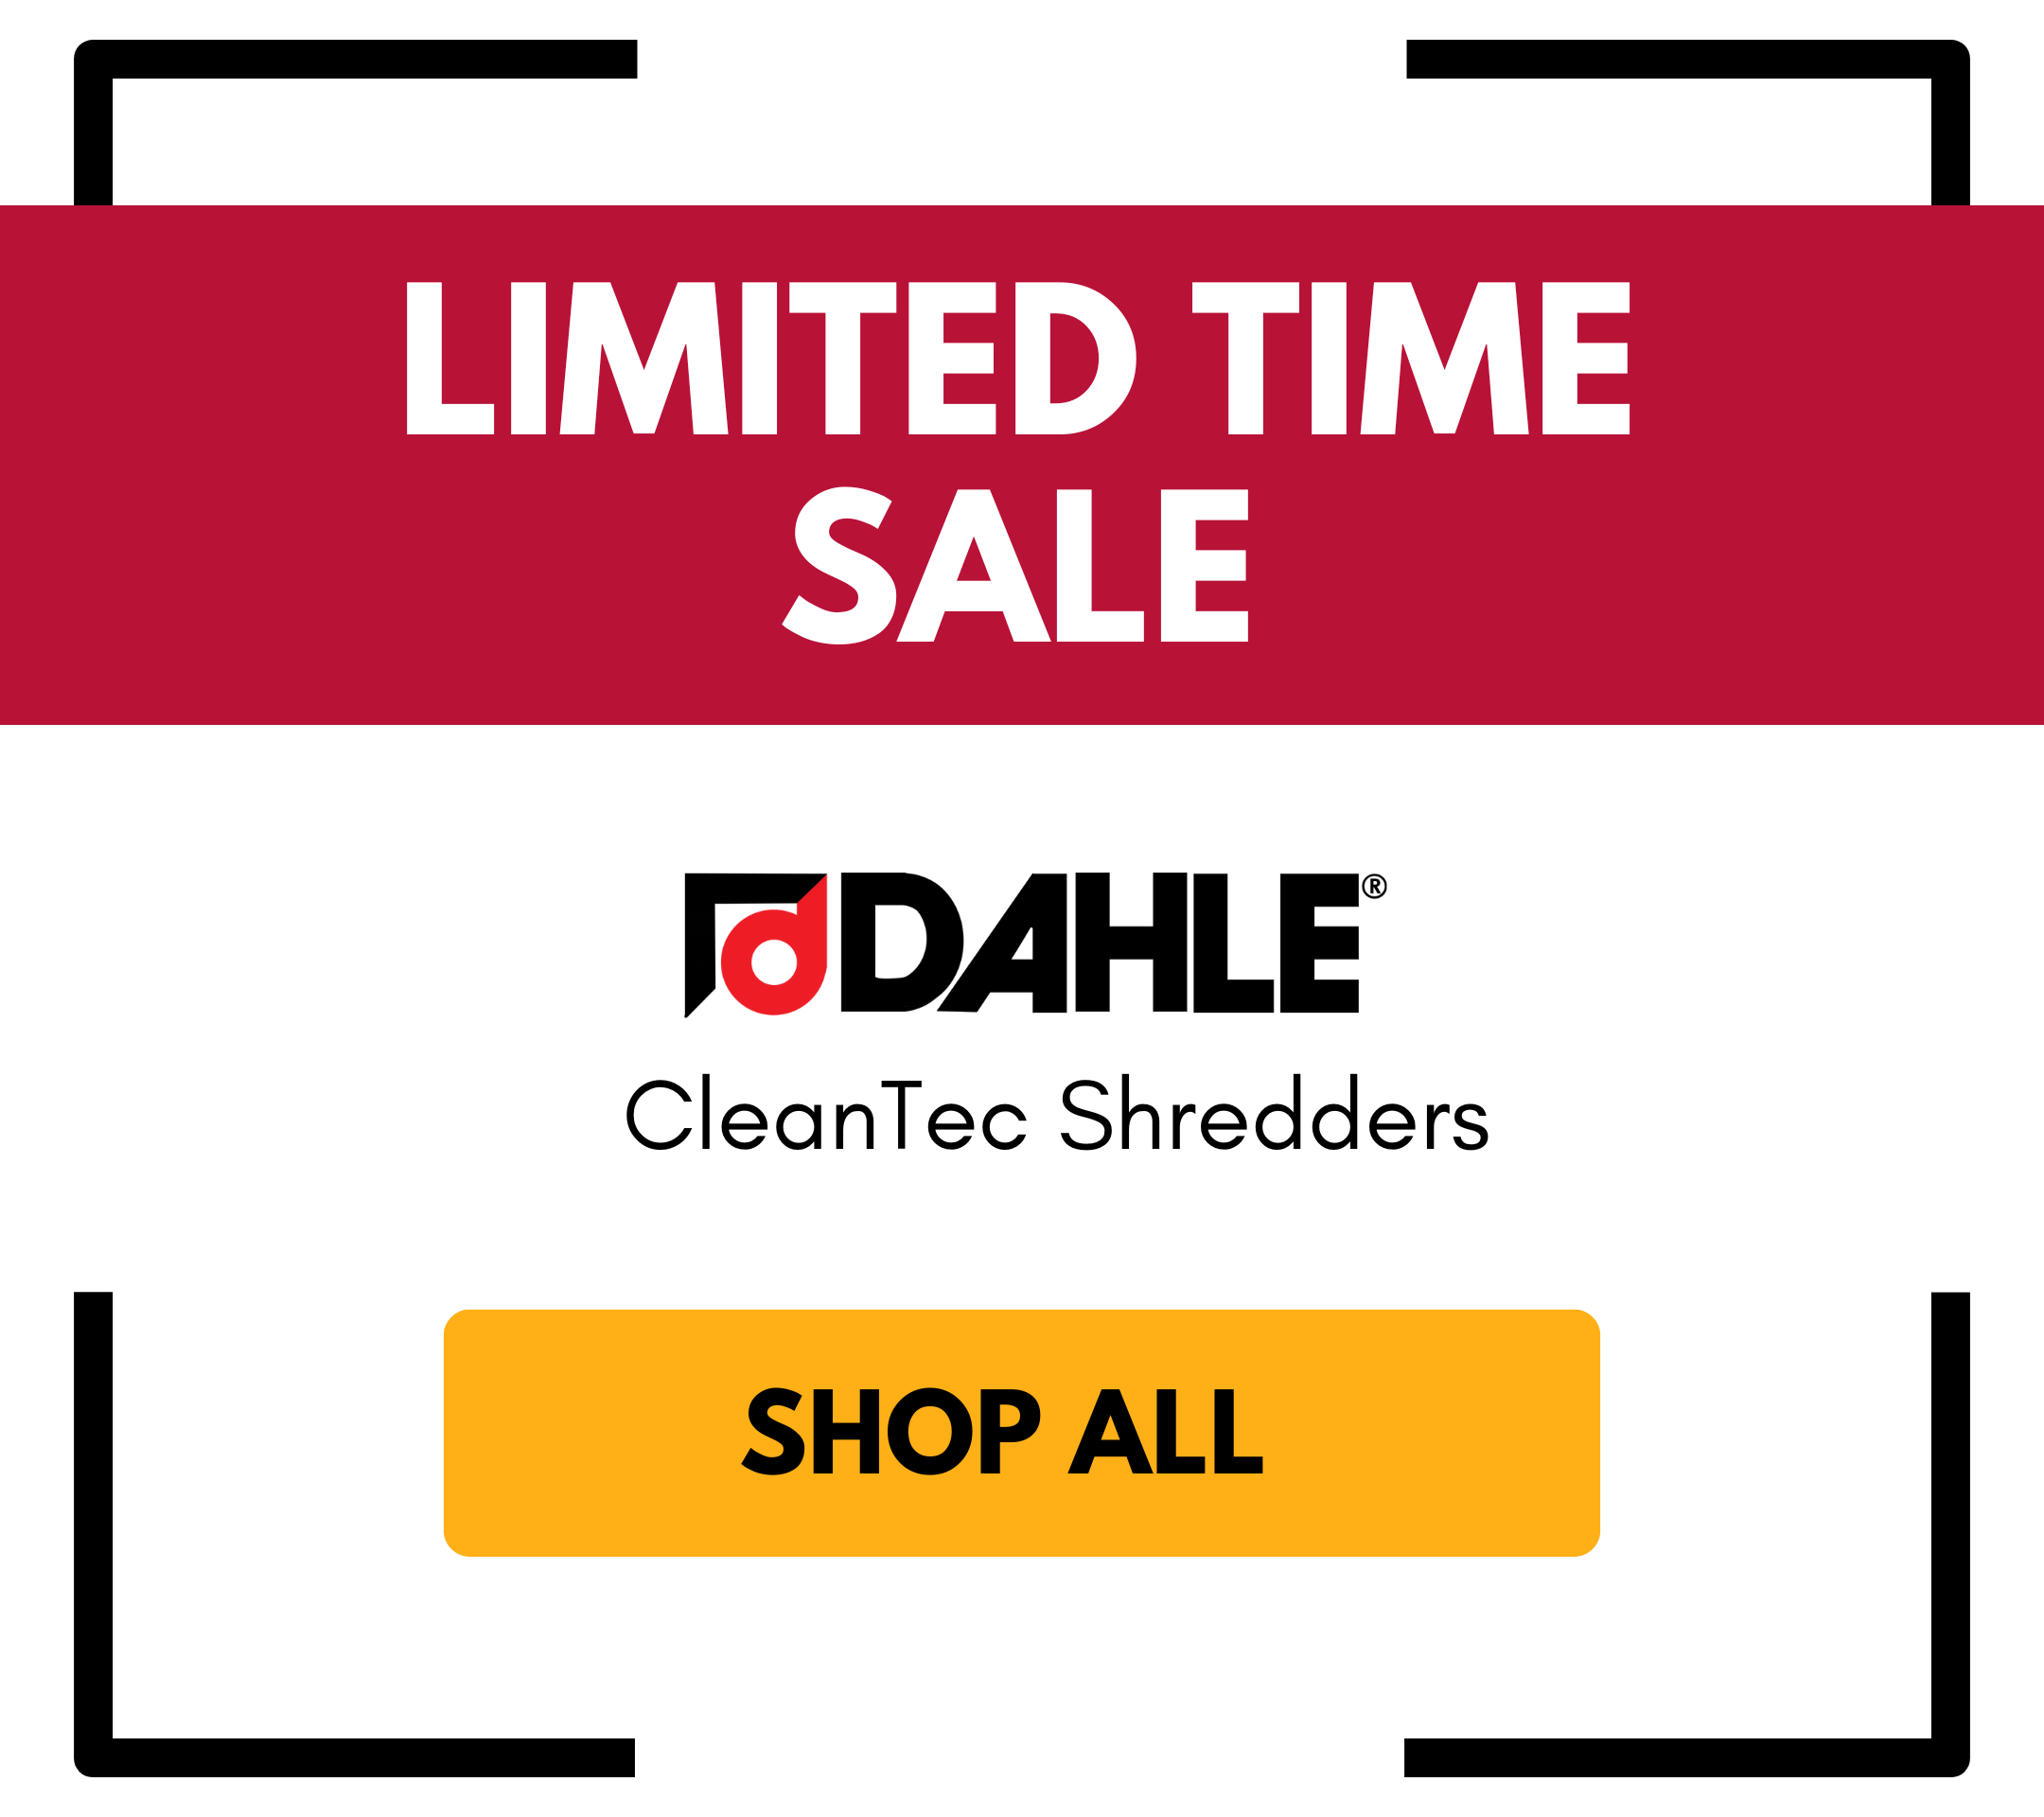 Dahle CleanTec Shredders on sale for a limited time.